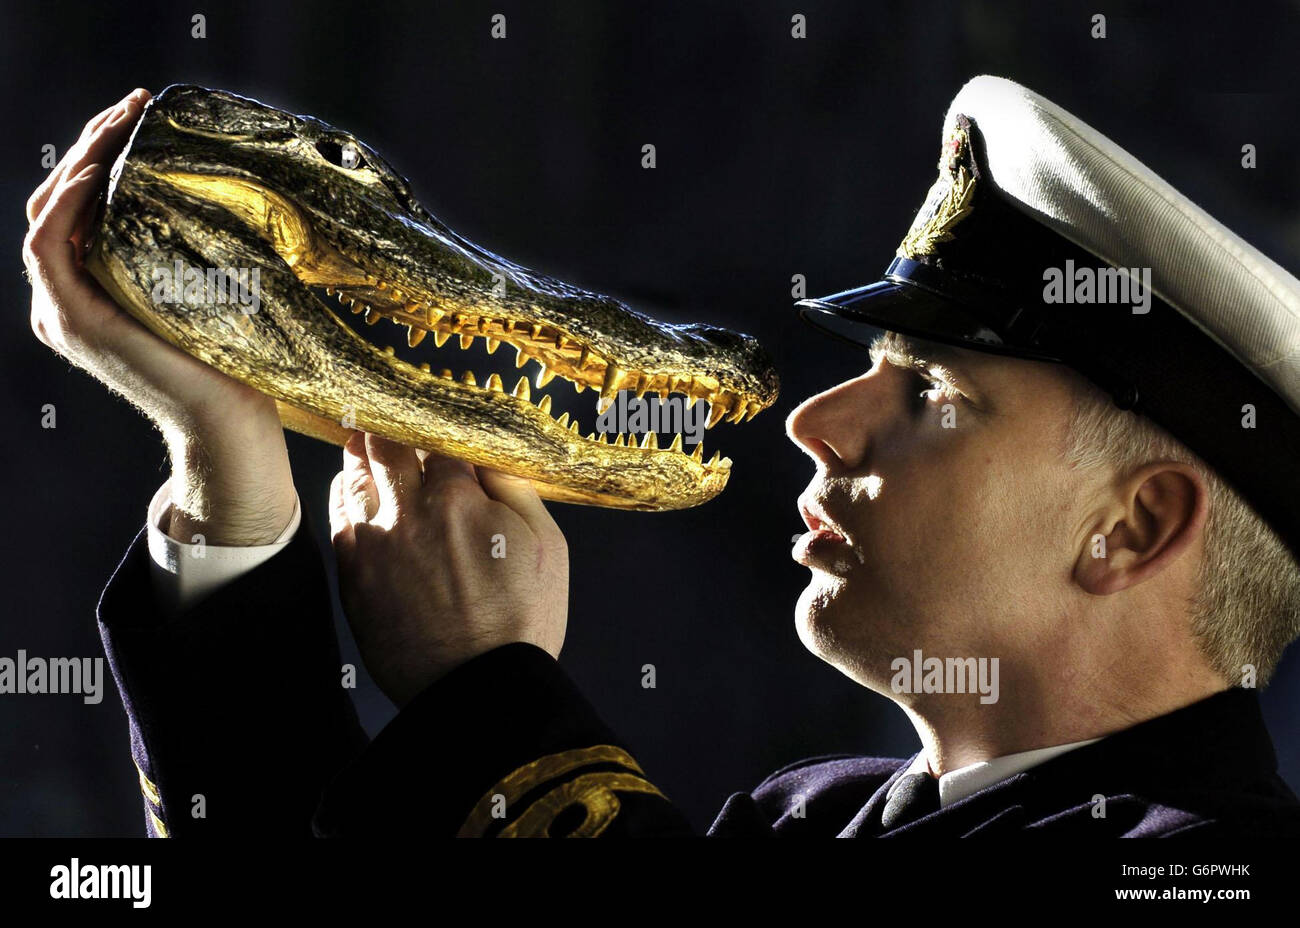 Customs officer Patrick McGroarty takes a close look at the head of a crocodile, paper weight, on display at Deep Sea World near Edinburgh, as part of an exhibition of wildlife threatened by international trade. Stock Photo